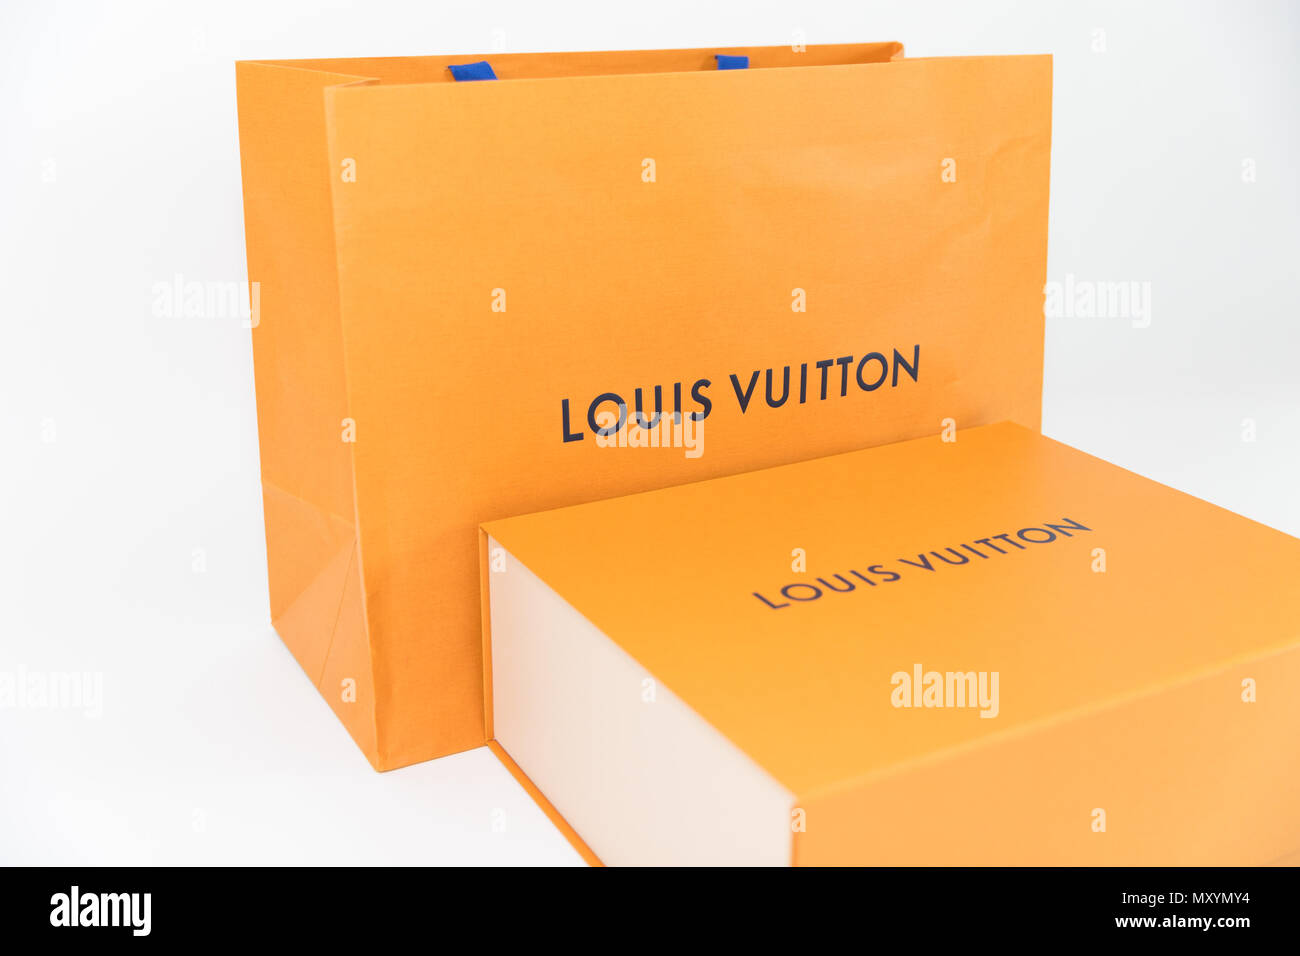 Love these pictures via @gofutureny ❤️ #louisvuitton